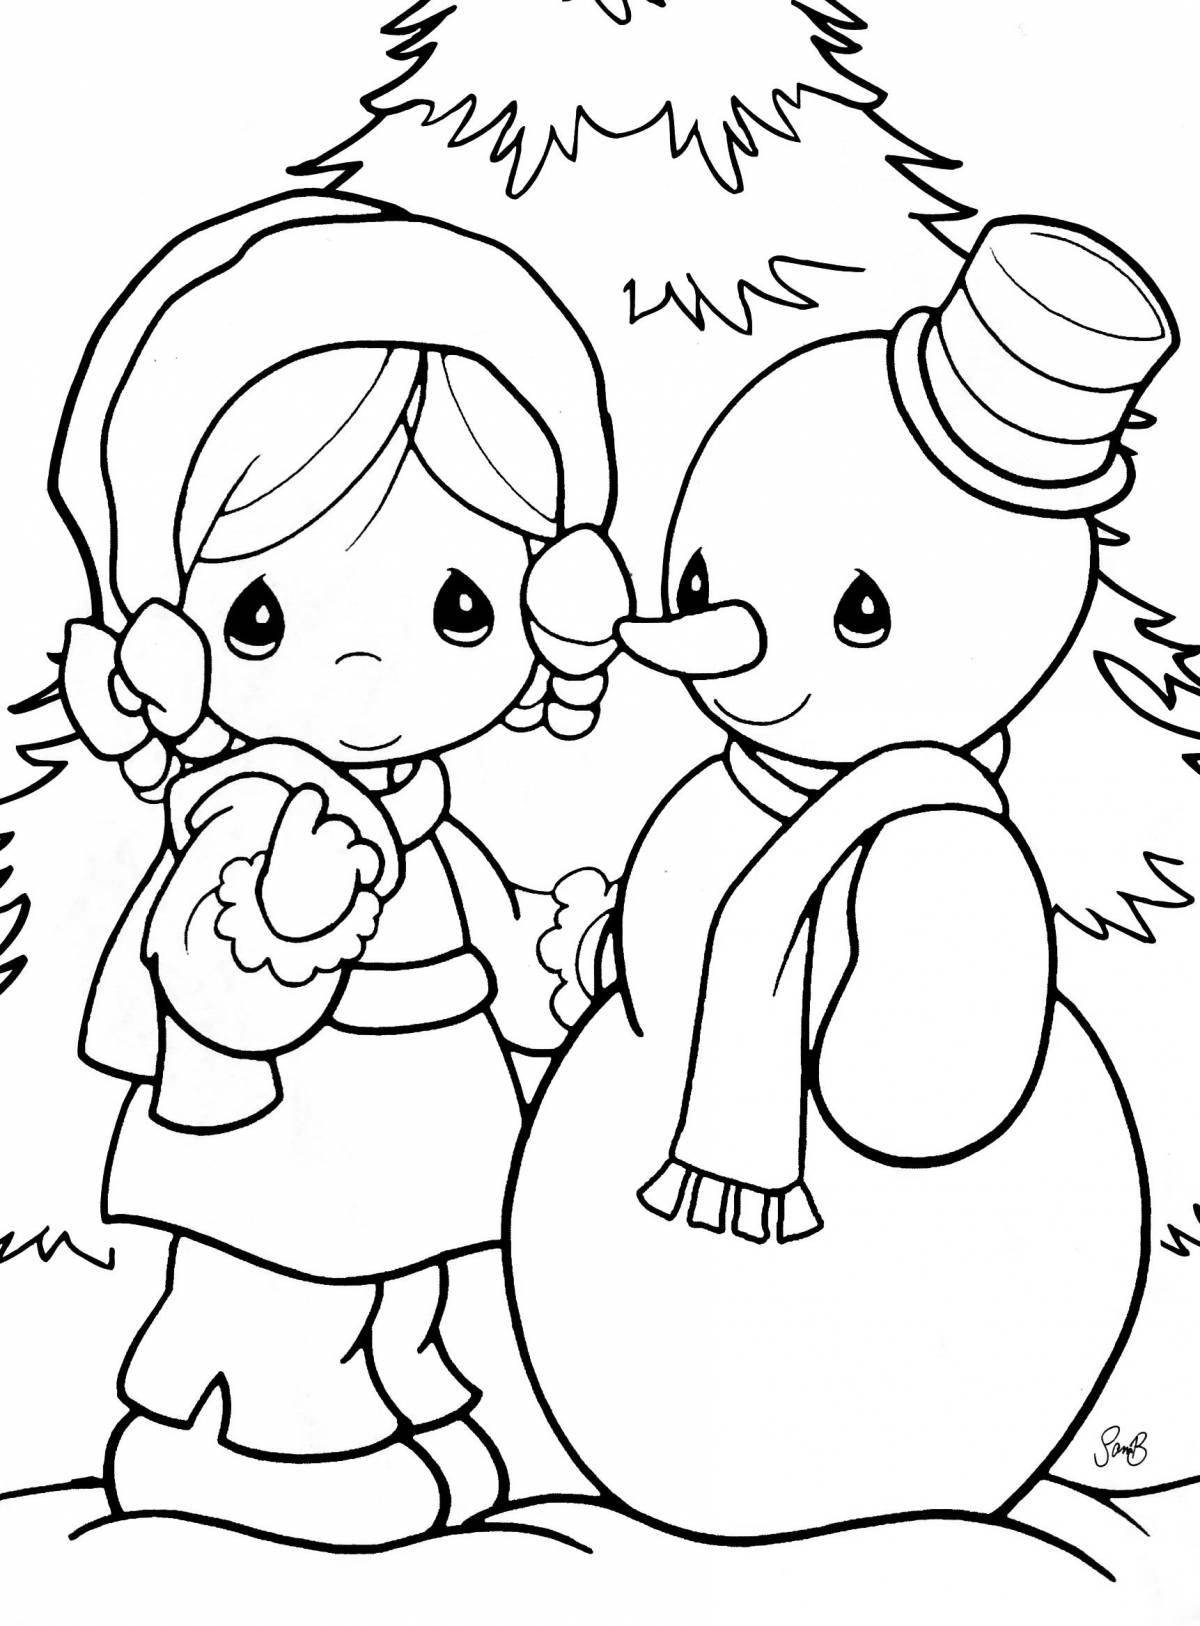 Playful hymns coloring page